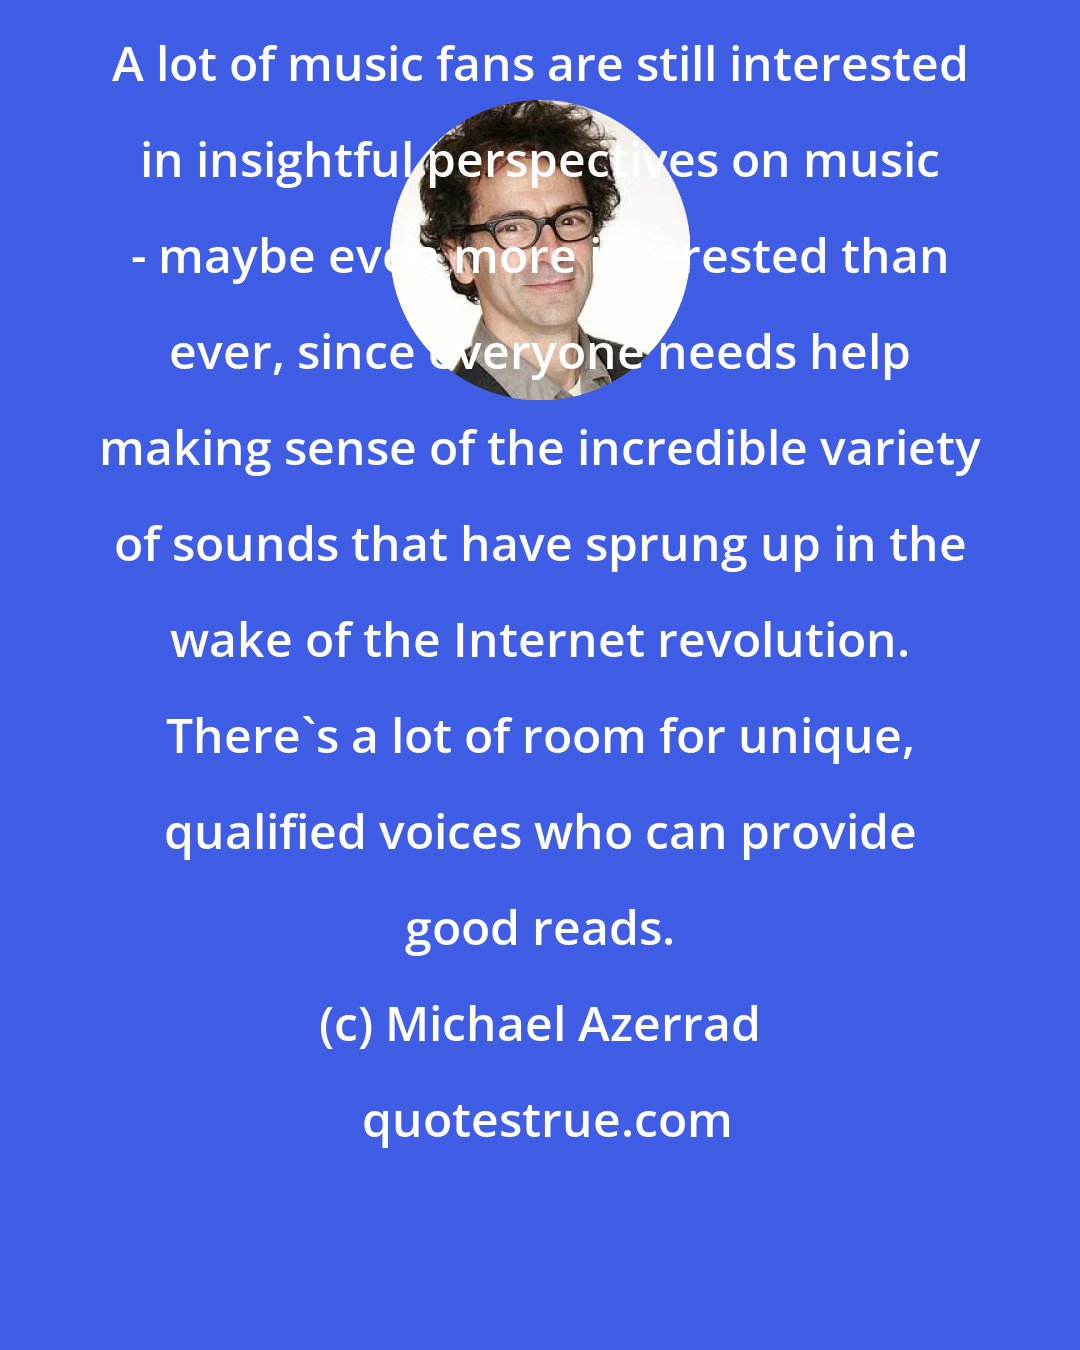 Michael Azerrad: A lot of music fans are still interested in insightful perspectives on music - maybe even more interested than ever, since everyone needs help making sense of the incredible variety of sounds that have sprung up in the wake of the Internet revolution. There's a lot of room for unique, qualified voices who can provide good reads.